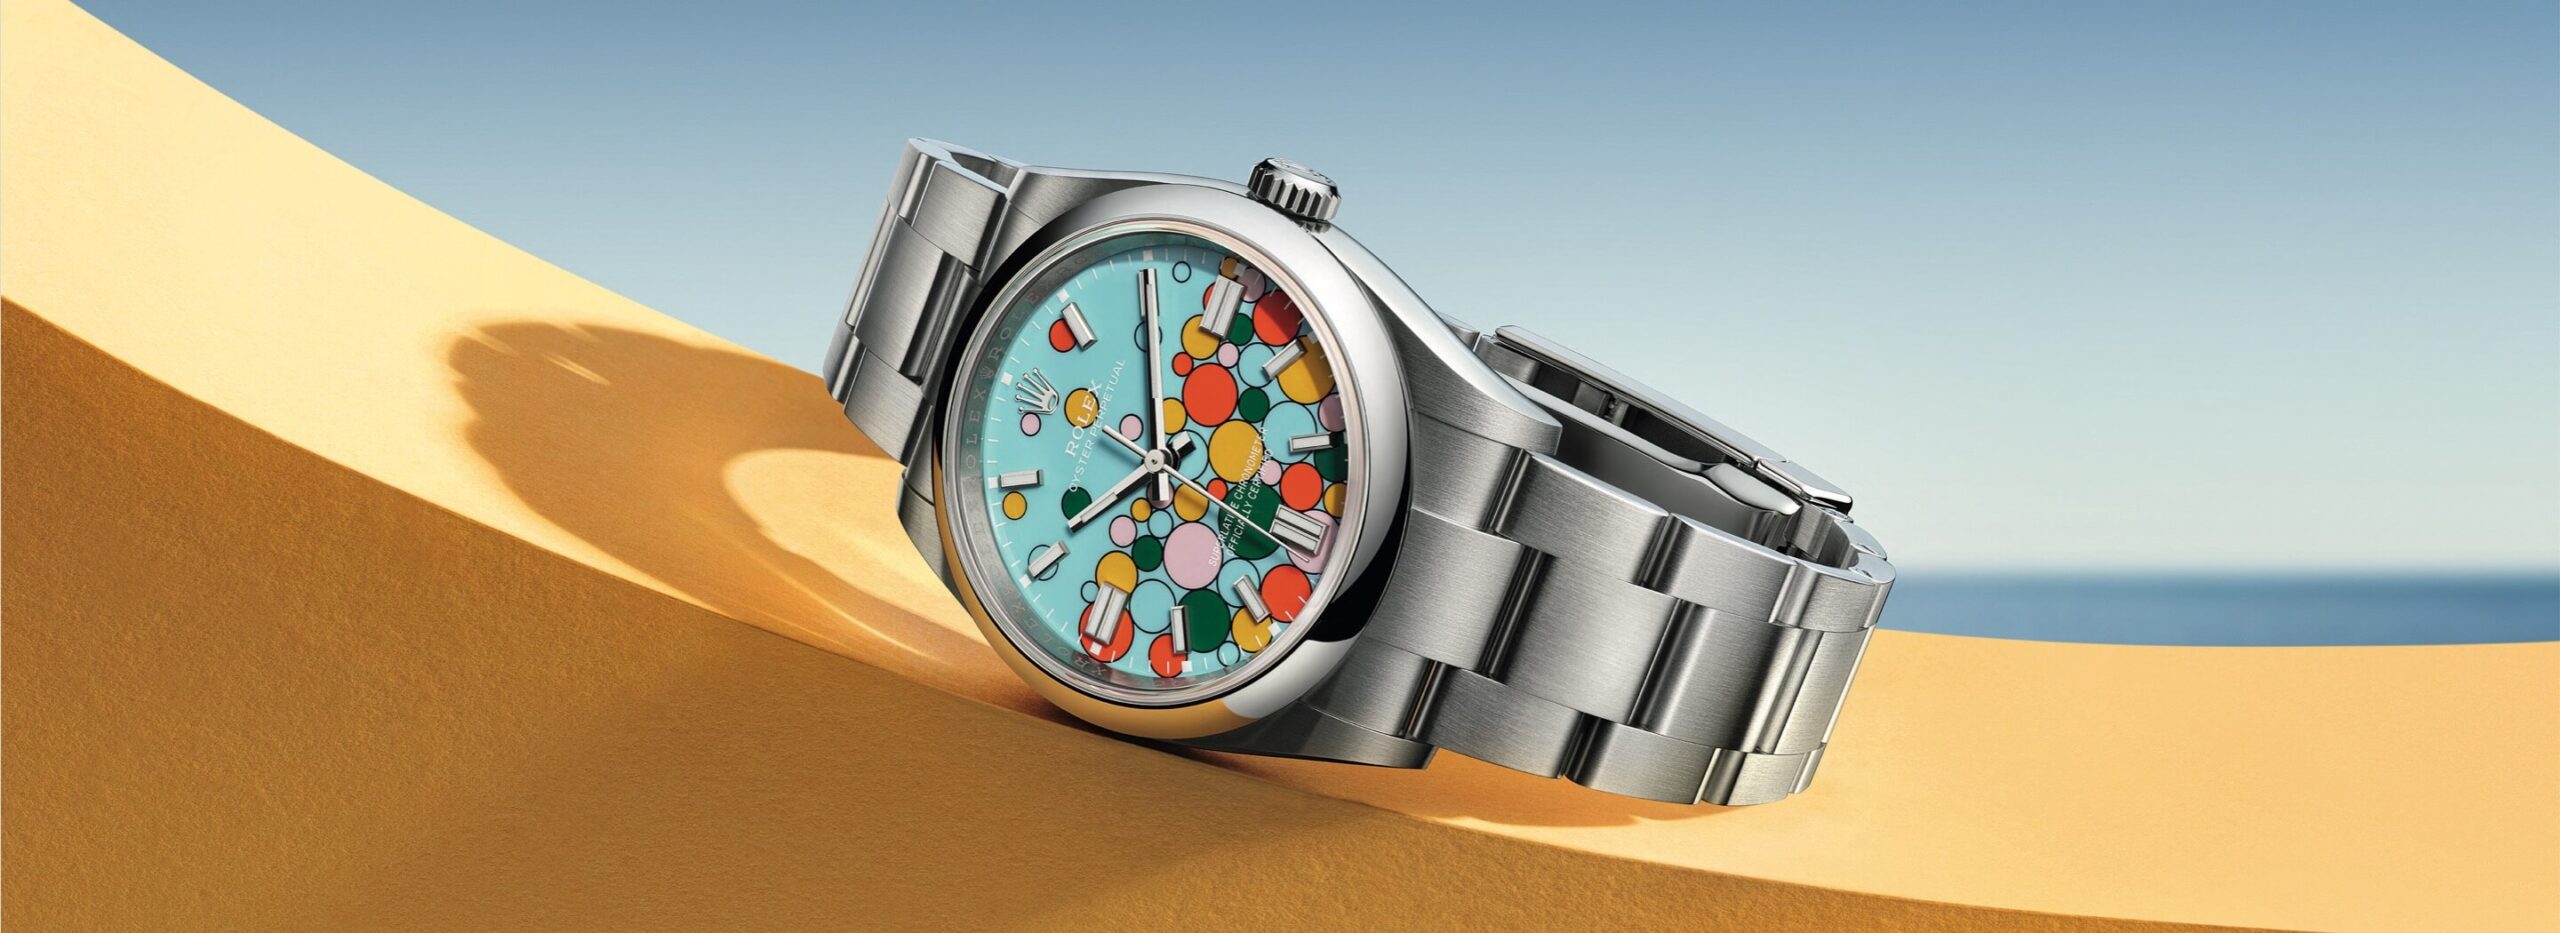 rolex oyster perpetual watches - global watch company